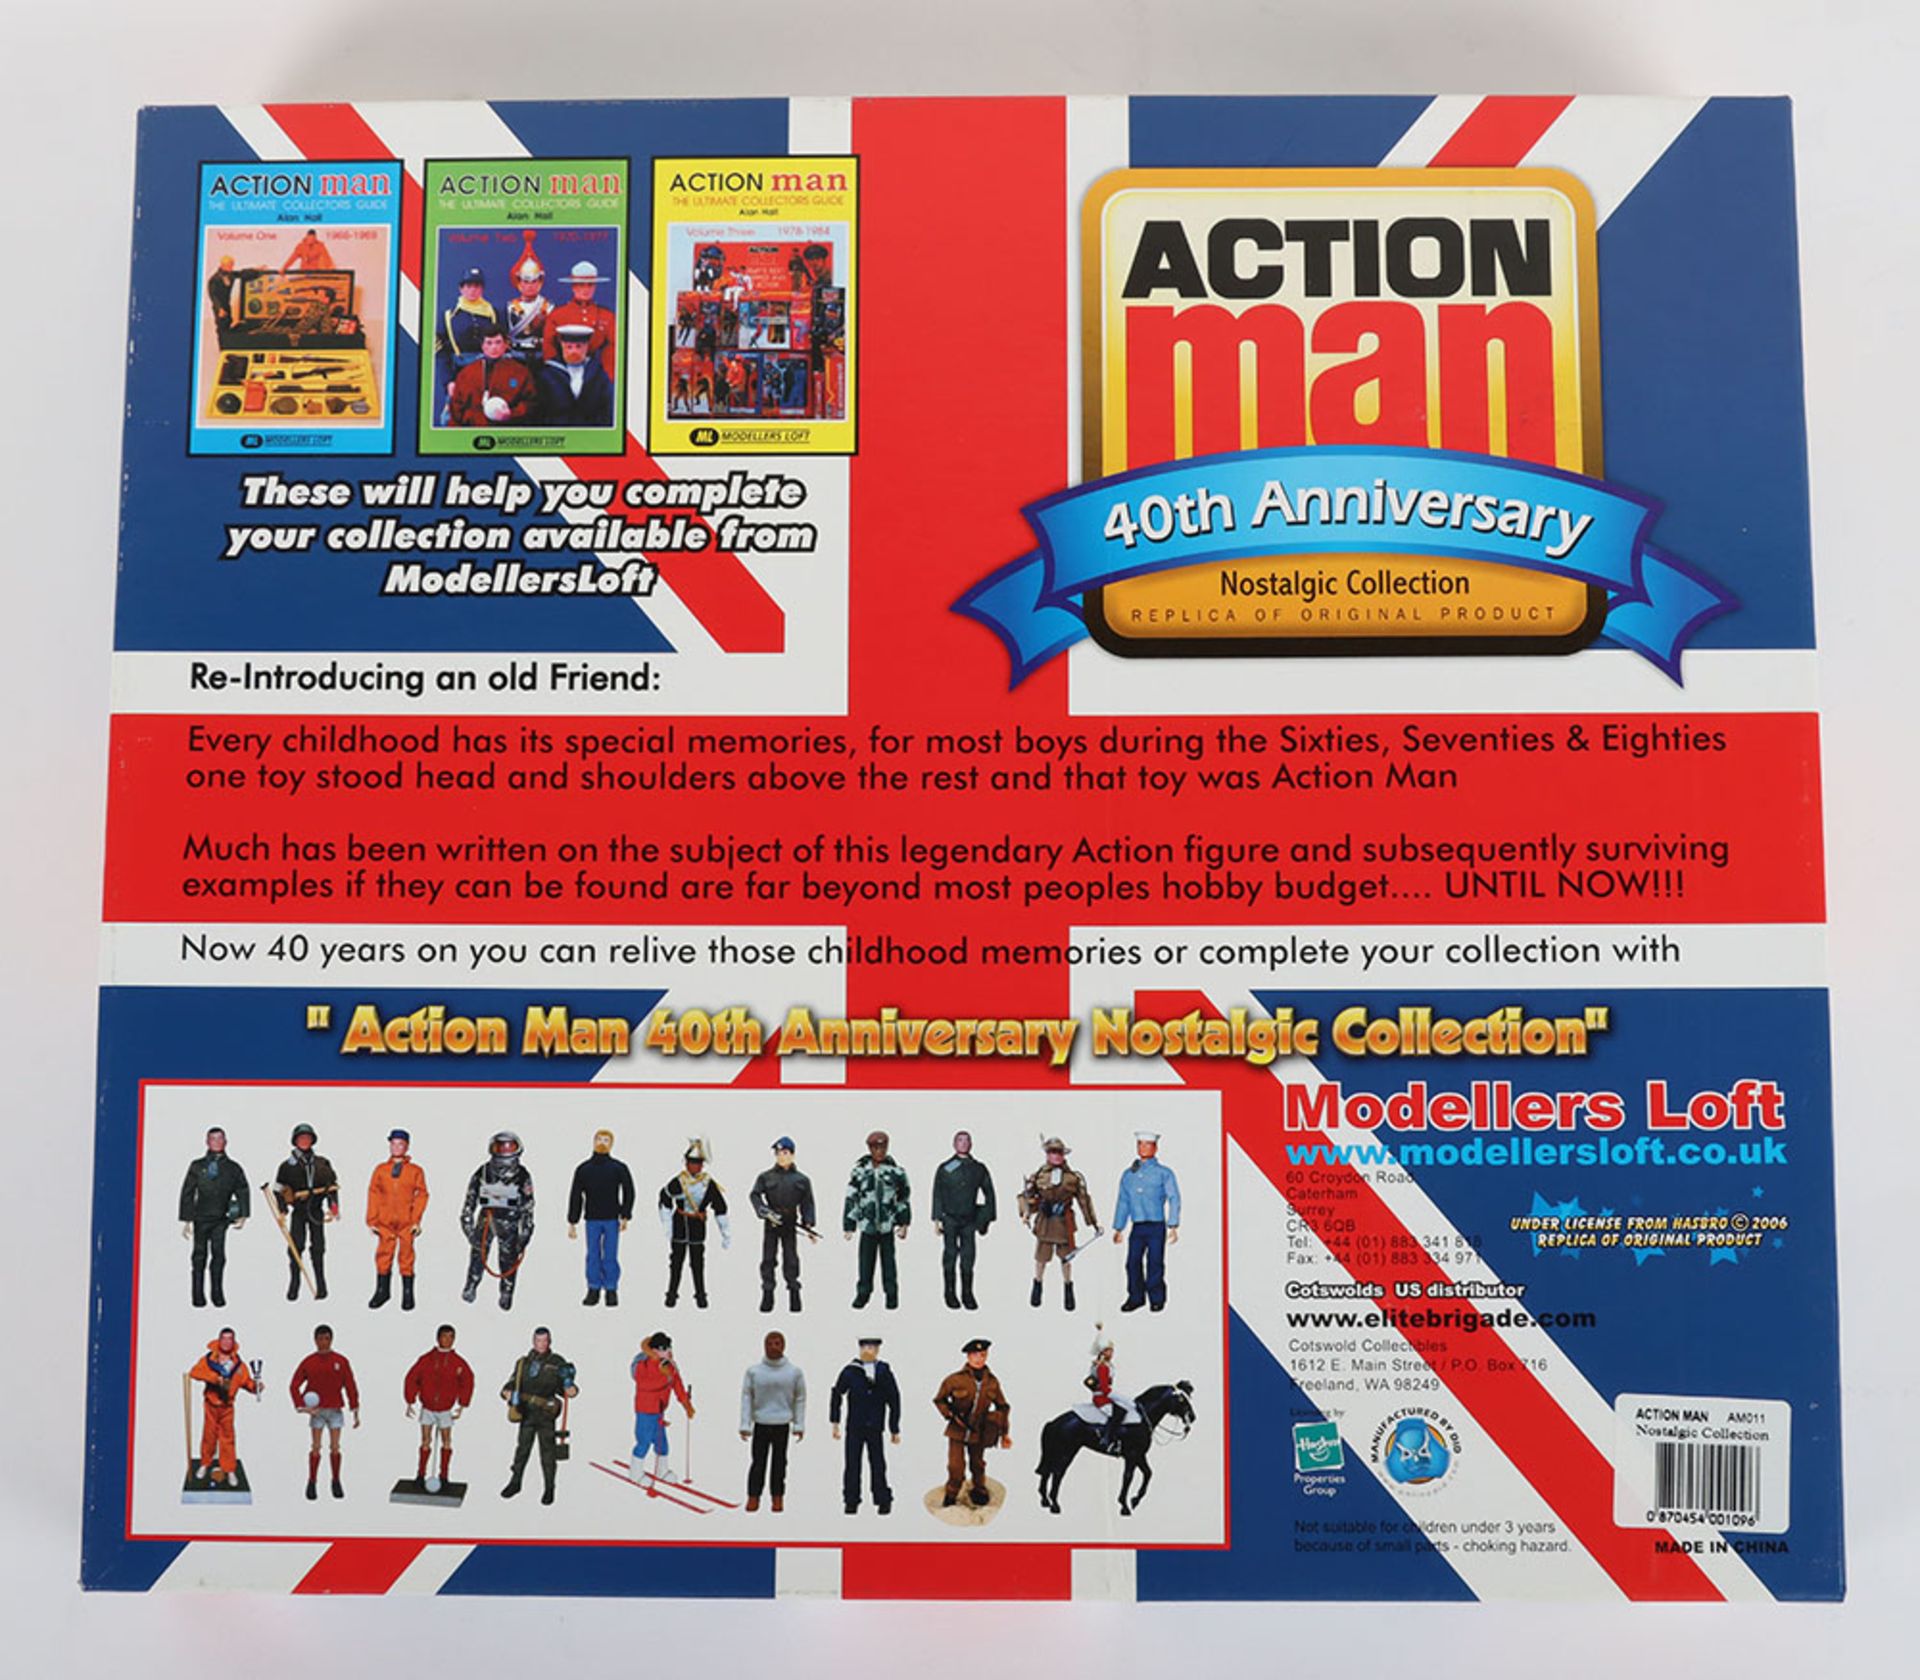 Action Man Palitoy Sportsman Famous Football Clubs Arsenal 40th Anniversary Nostalgic Collection - Image 2 of 4